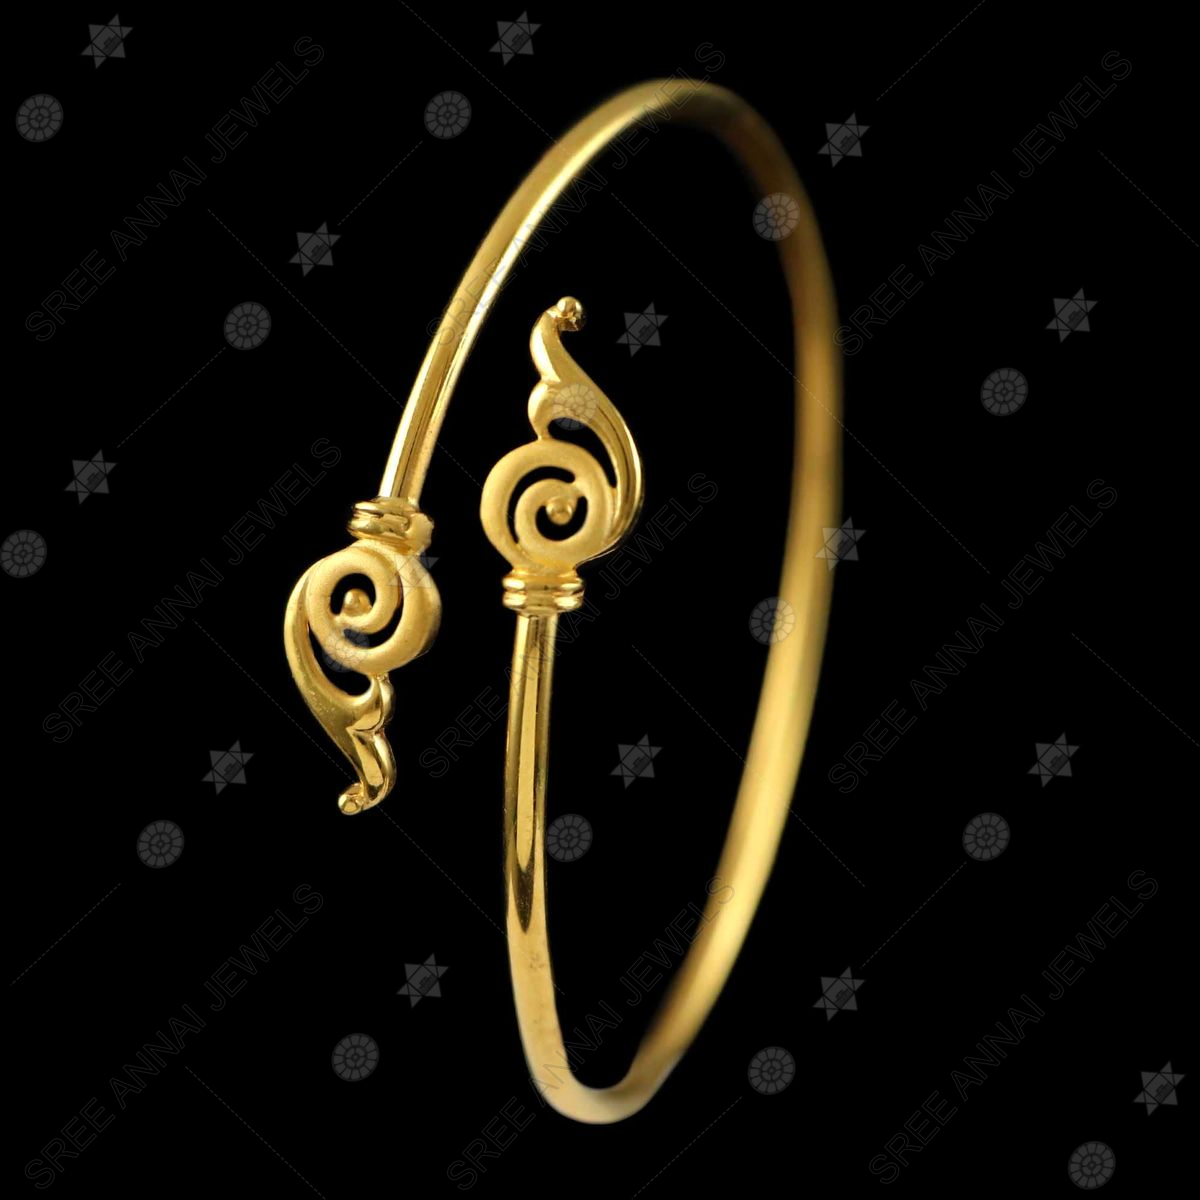 Don's Jewelry - 14K GOLD DIAMOND FLEXIBLE BANGLE WITH CLASP